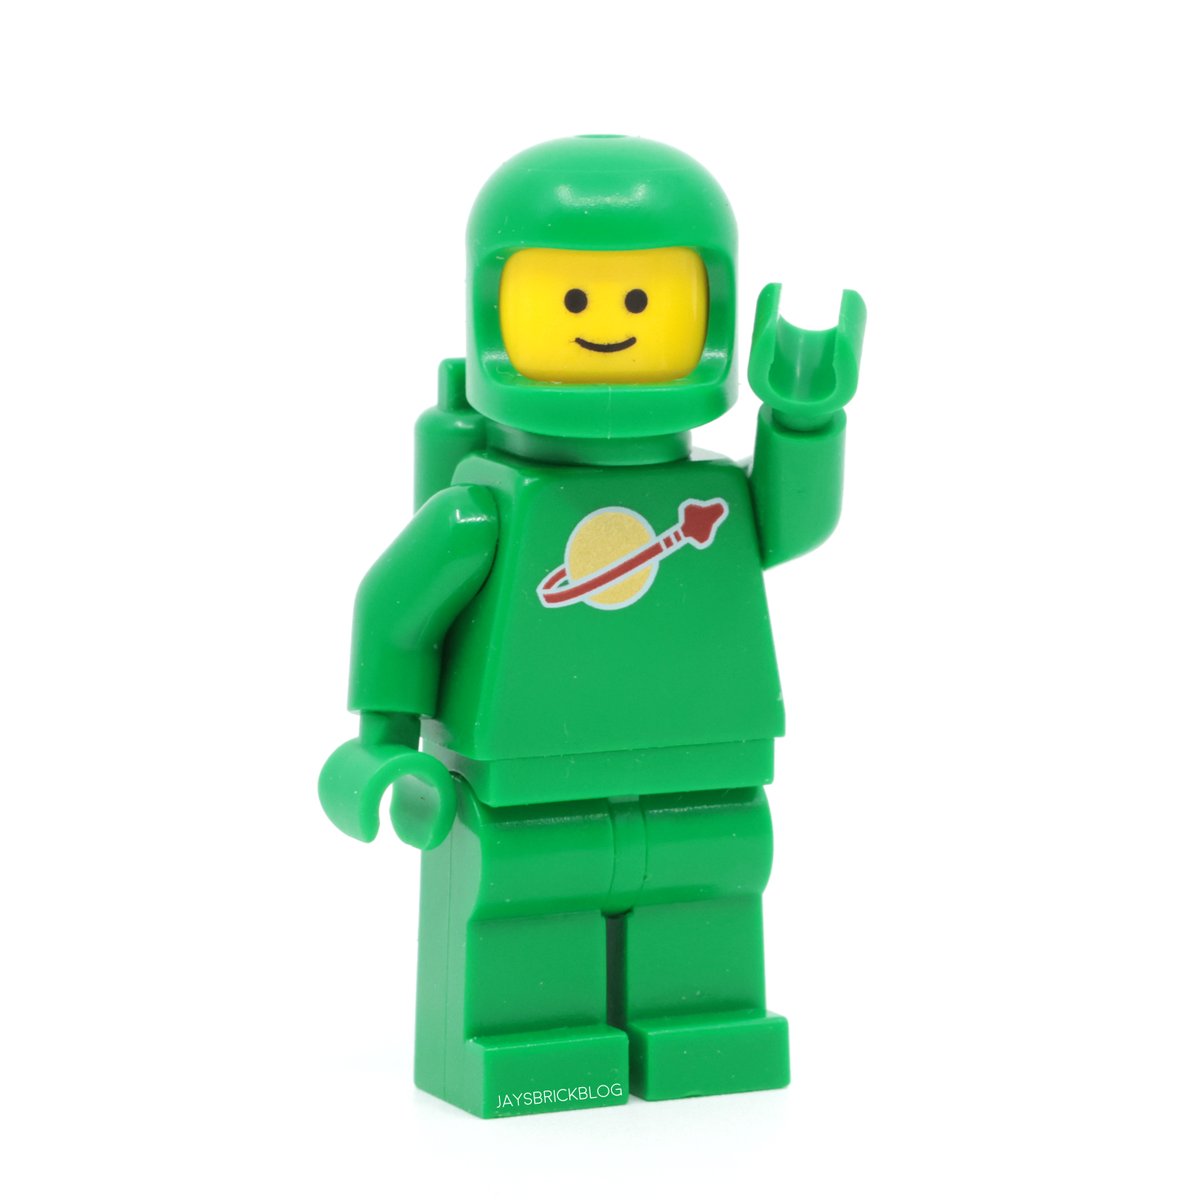 Purist Green Classic Space Astronaut says hello! Finally made possible thanks to the Green Classic Space Helmet found in #monkiekid 80054 Megapolis City!